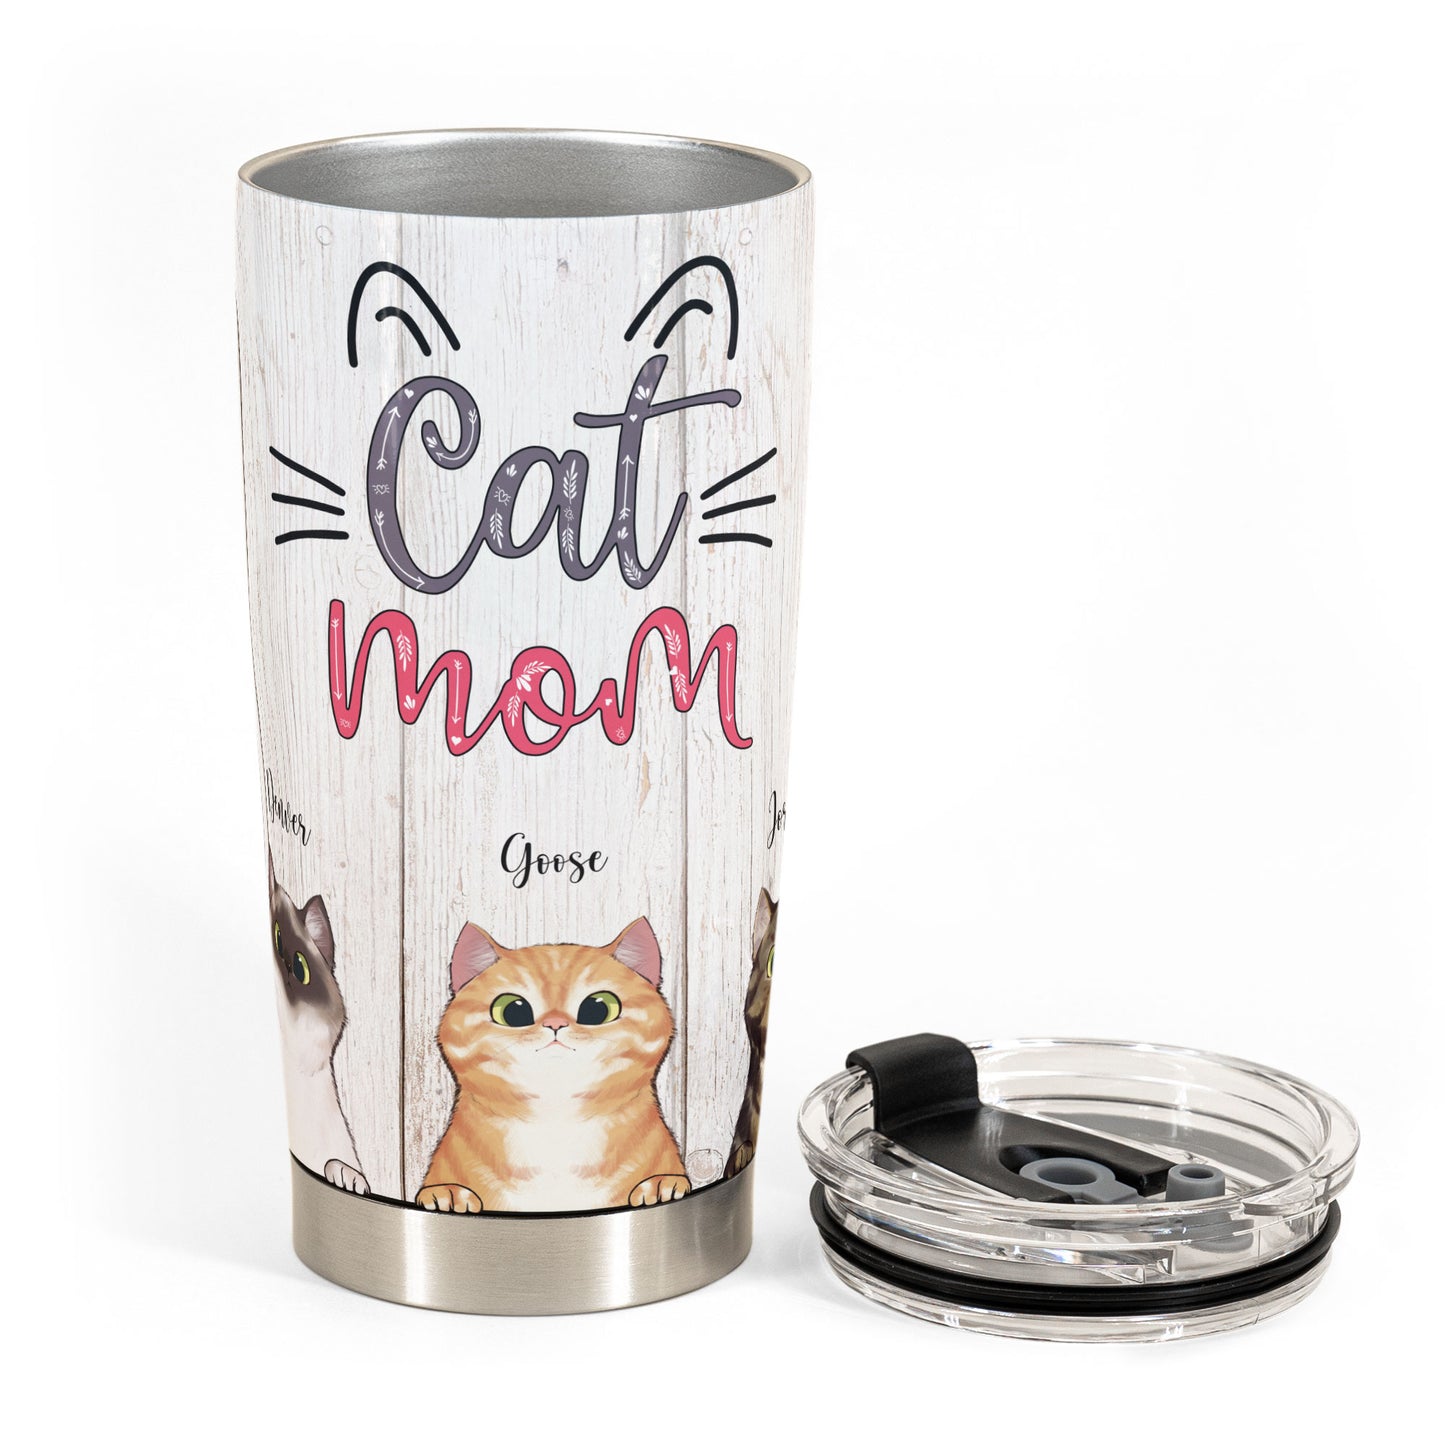 Everything Tastes Better With Cat Hair - Personalized Tumbler Cup - Gift For Cat Lovers